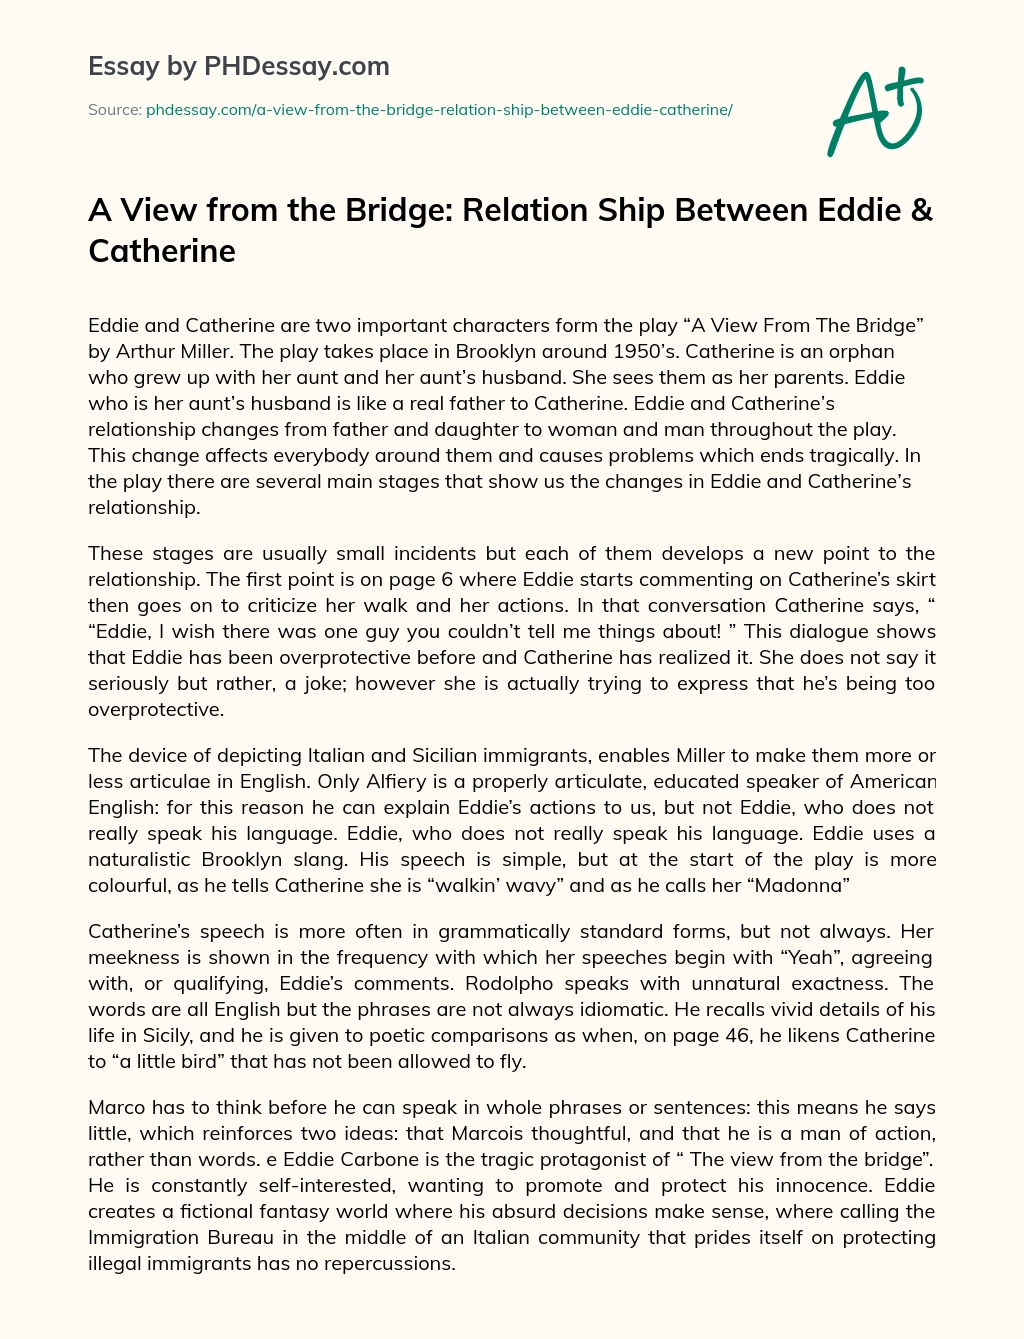 A View from the Bridge: Relation Ship Between Eddie & Catherine essay